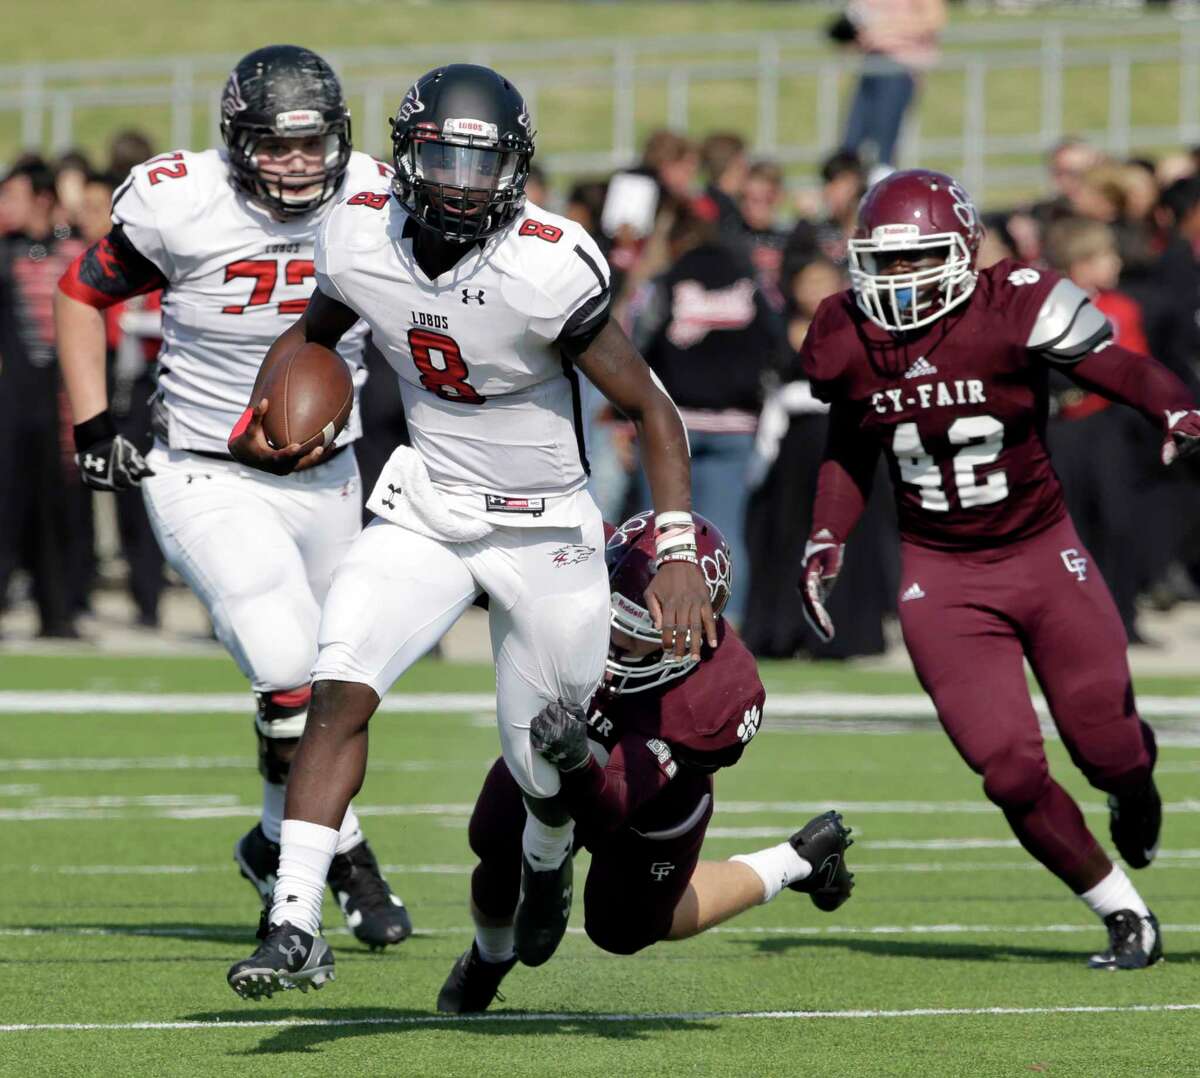 Langham Creek quarterback Chris Herron (8) is caught by Cy-Fair's Patrick Atkinson (30) during the first half of their game Saturday, Nov. 11, 2017, in Houston, TX. (Michael Wyke / For the Chronicle)